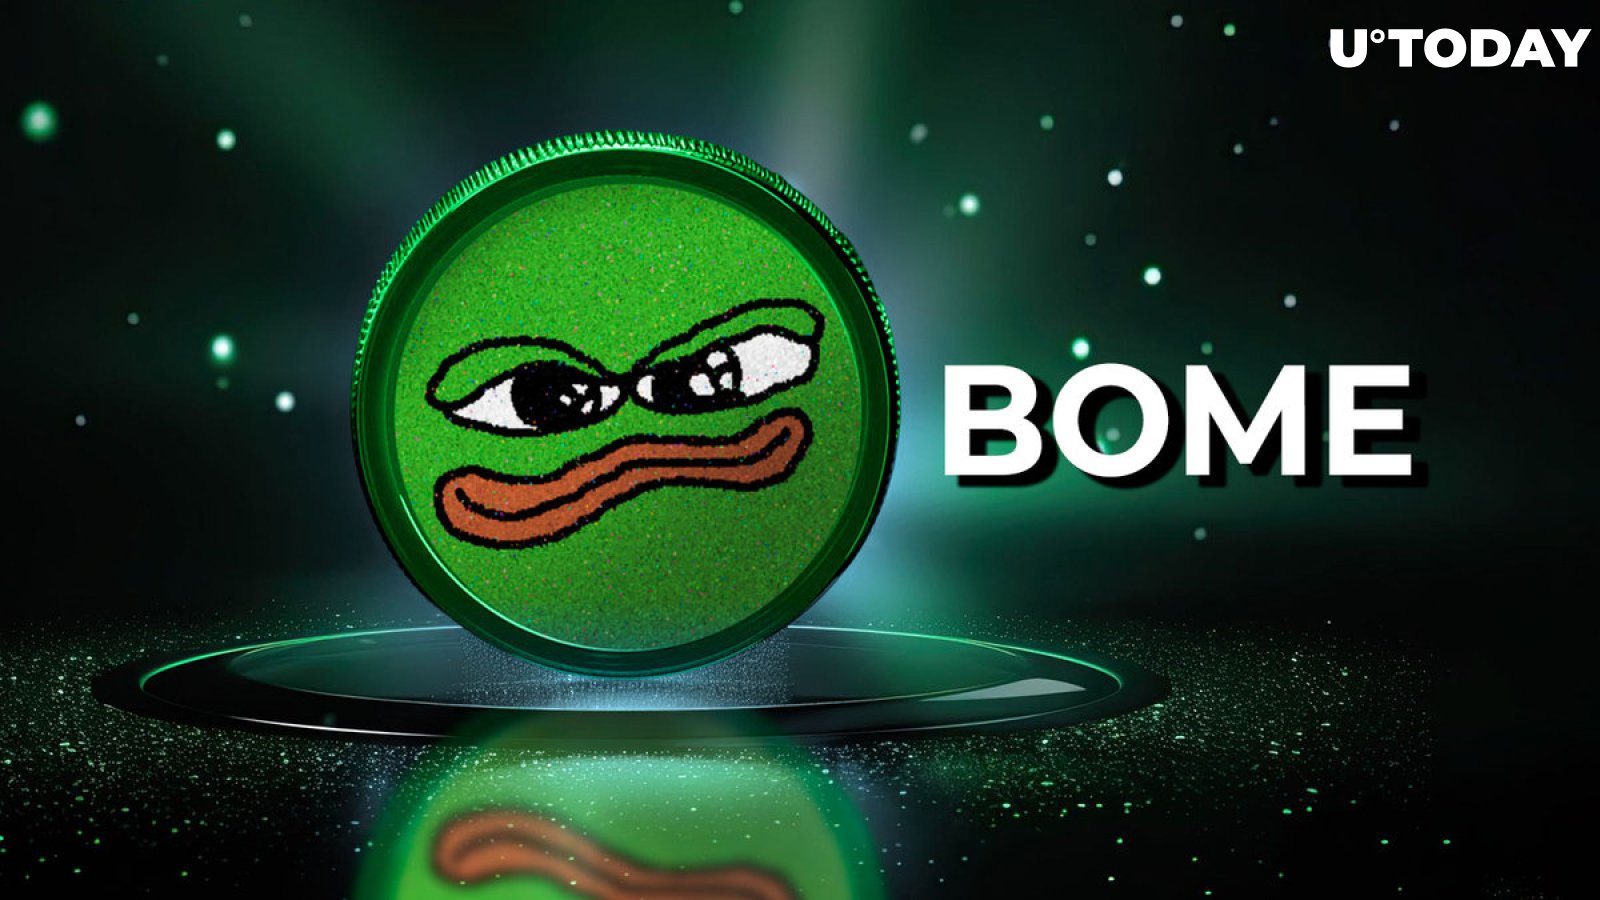 BOOK OF MEME (BOME) Up 300%, Will It Overtake PEPE and BONK?